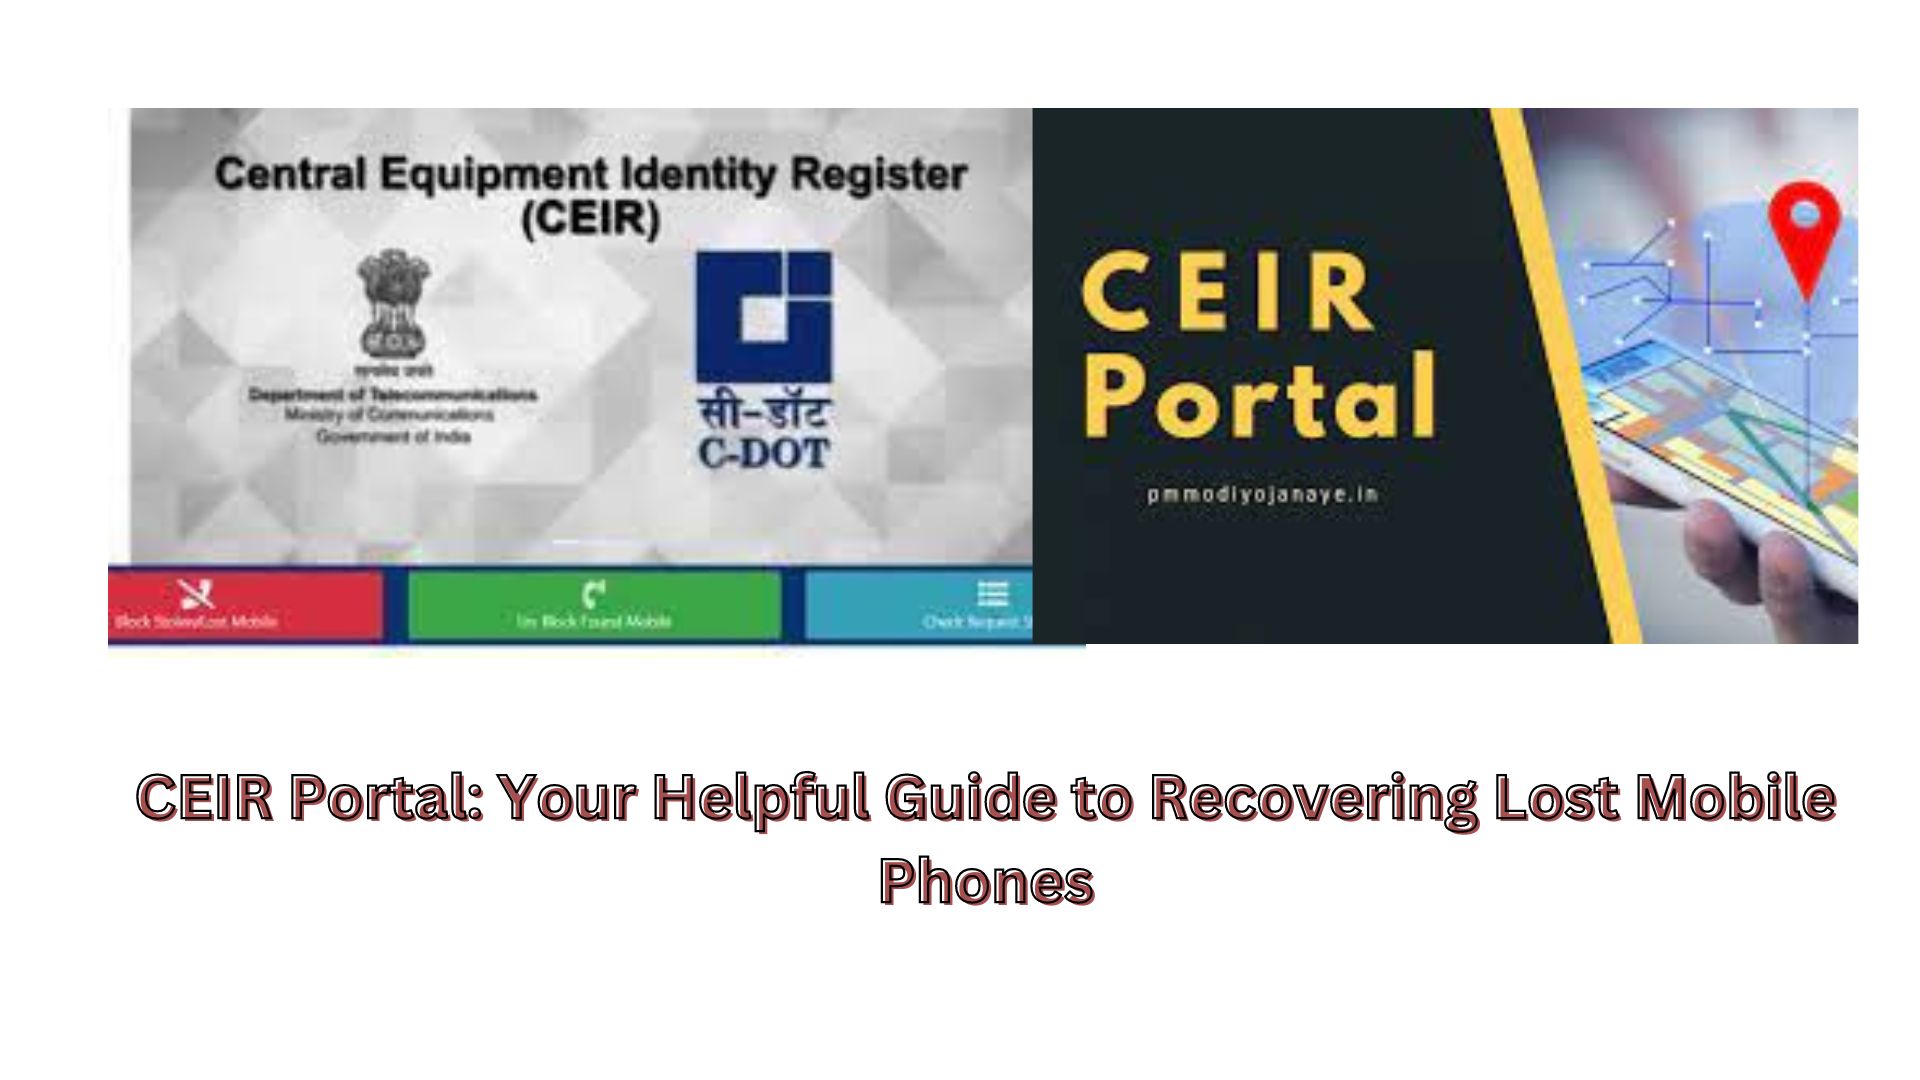 CEIR Portal: Your Helpful Guide to Recovering Lost Mobile Phones